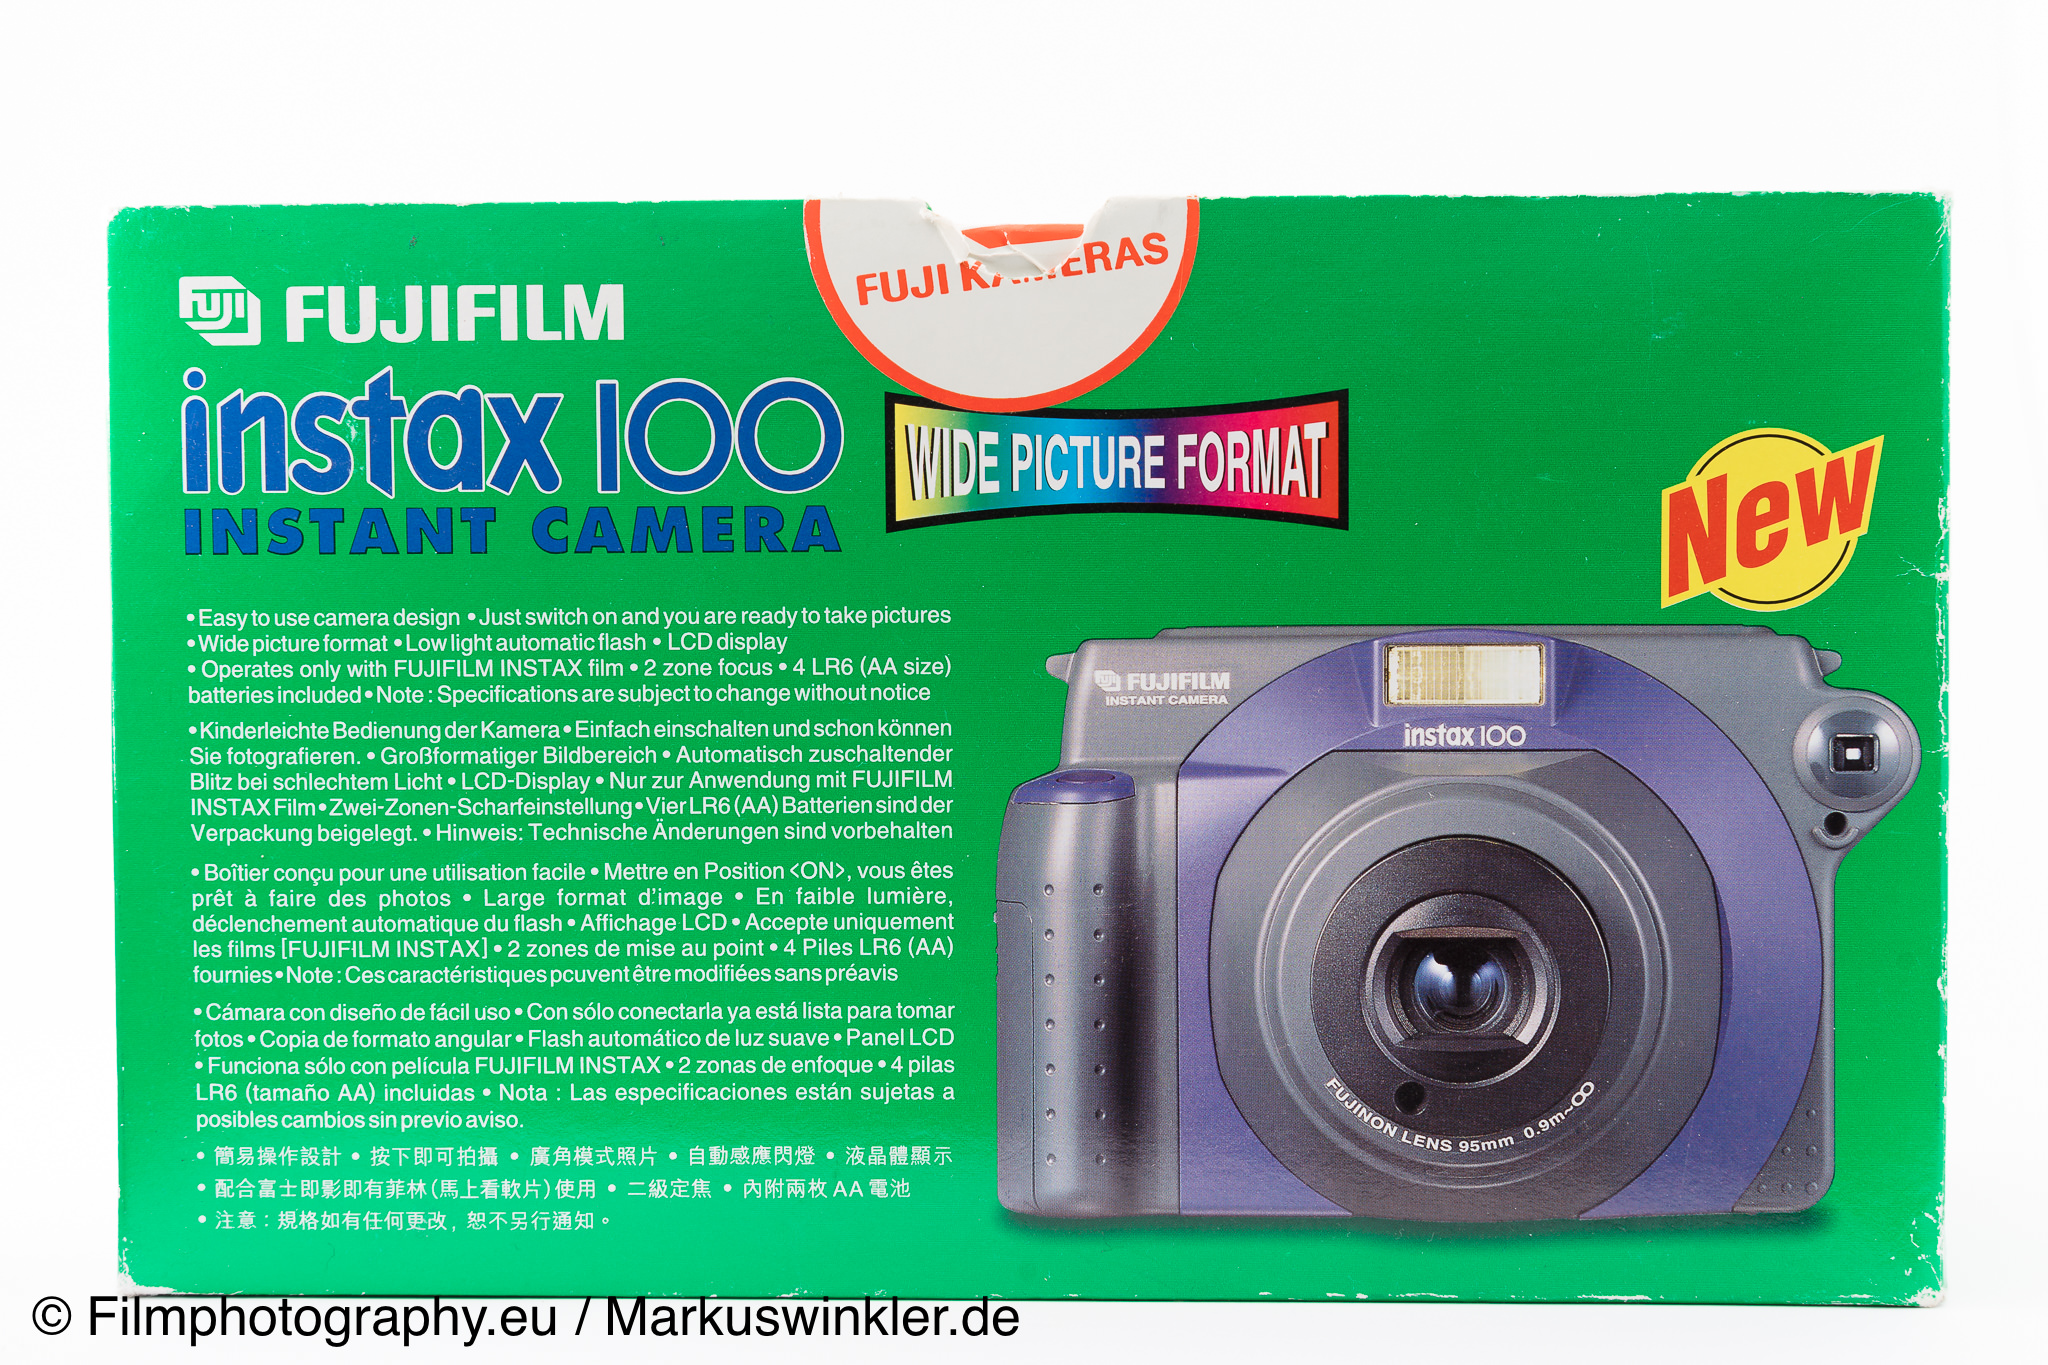 Bowling varme ekstremister Fujifilm Instax 100 - Functions and history of the instant camera